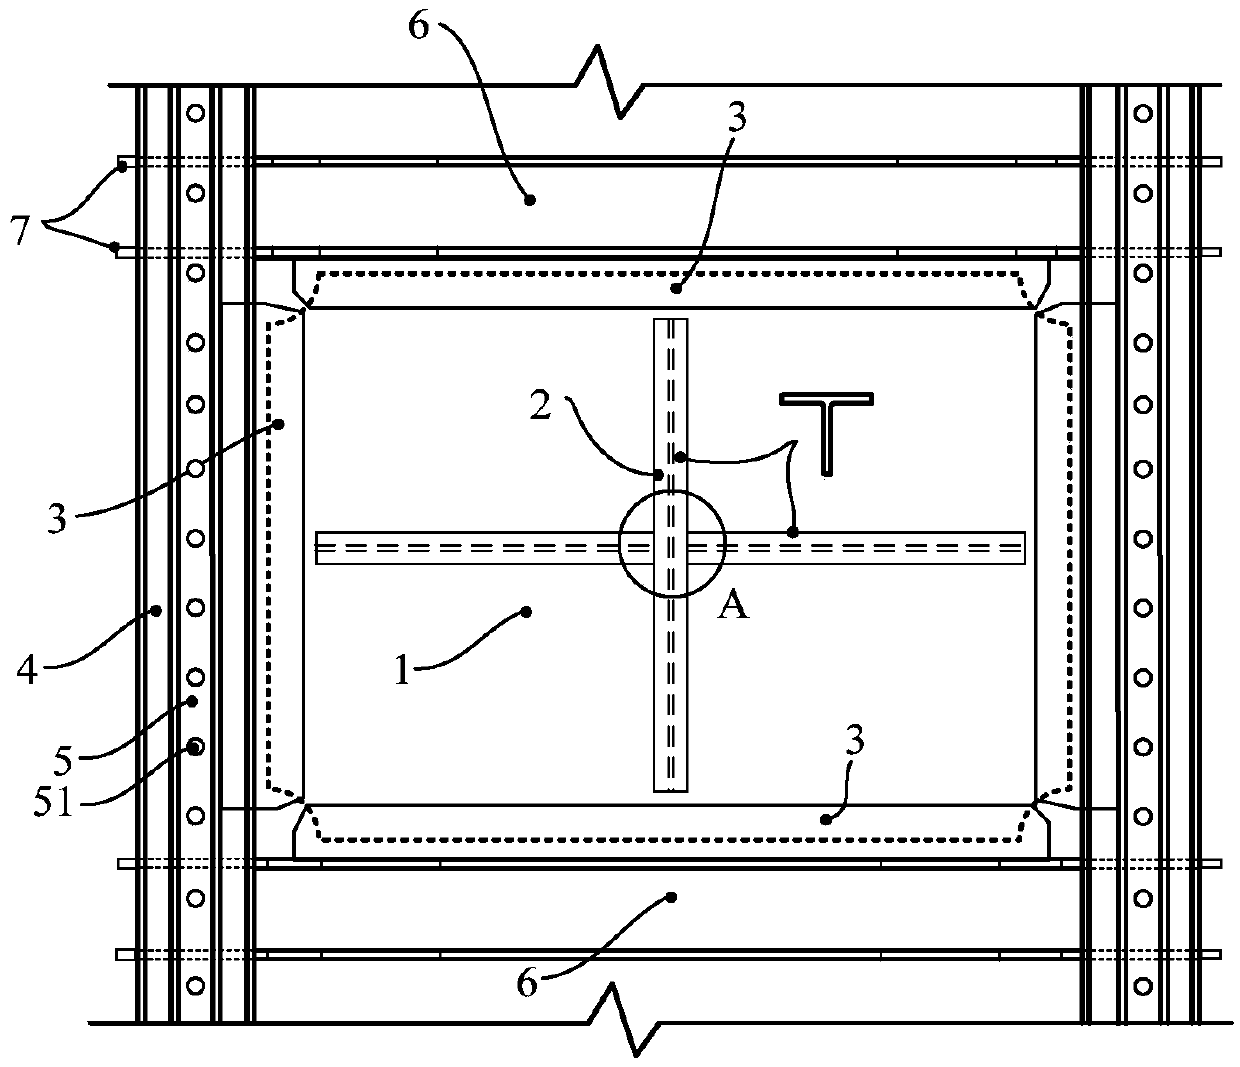 A low-yield-point steel plate shear wall structure with built-in steel tubular concrete frame